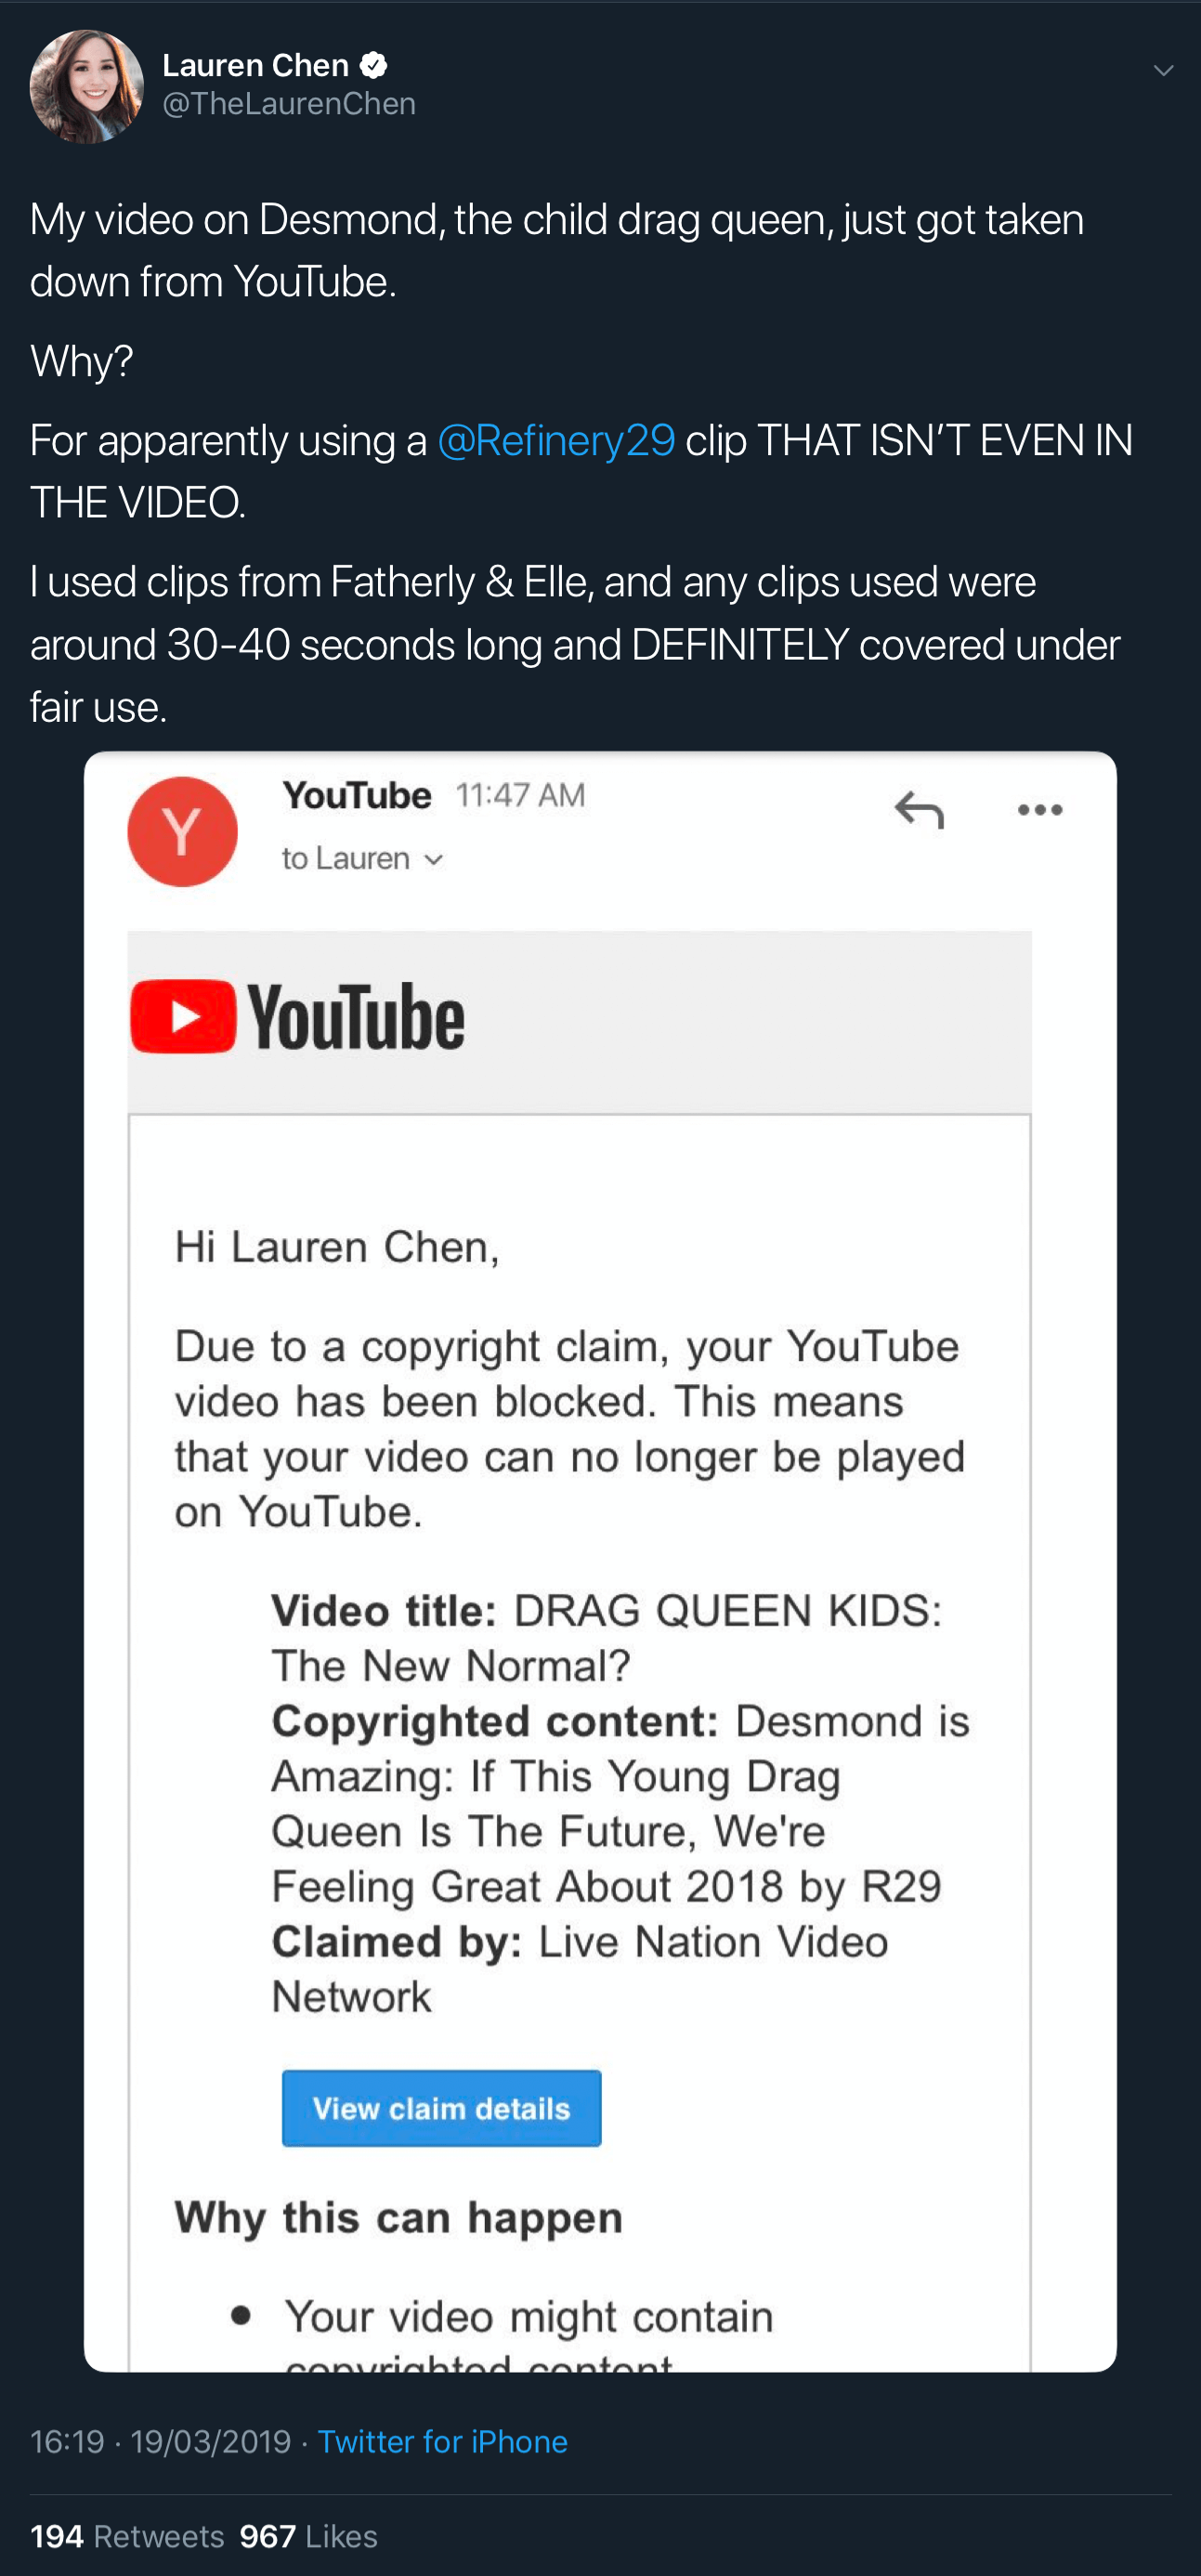 A tweet showing the fake YouTube copyright claim against Lauren Chen.